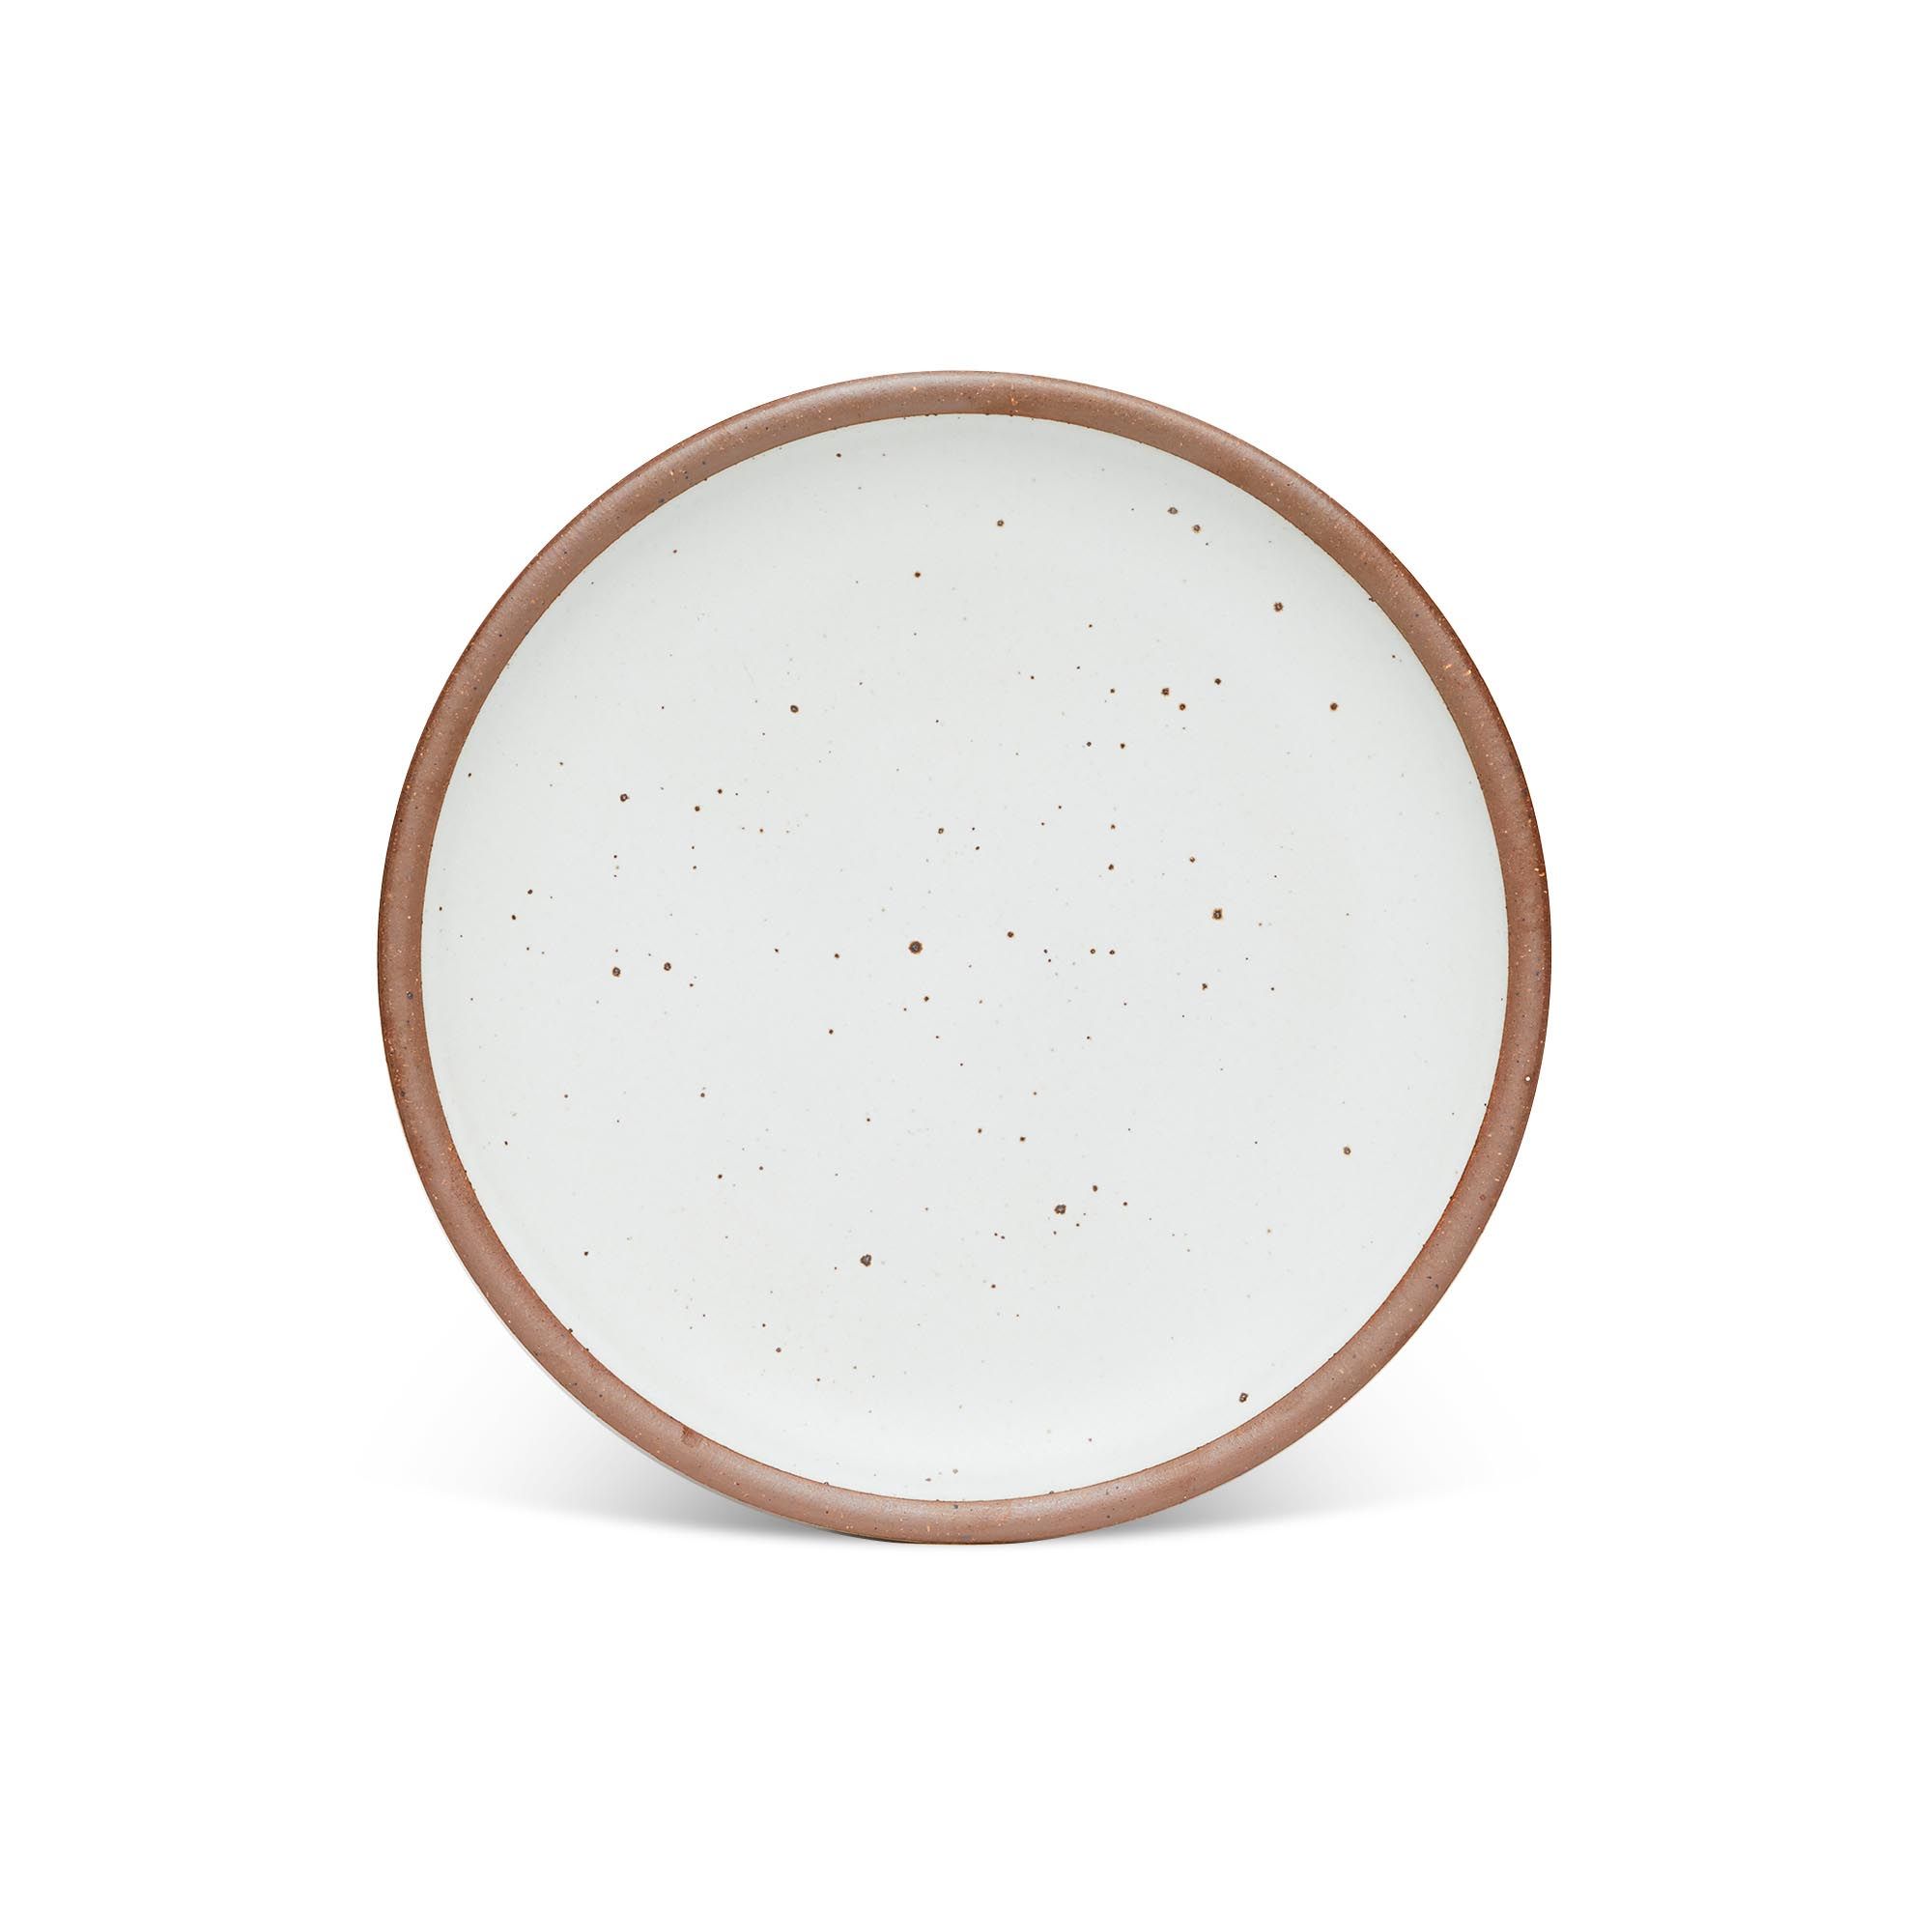 A dinner sized ceramic plate in a cool white color featuring iron speckles and an unglazed rim.